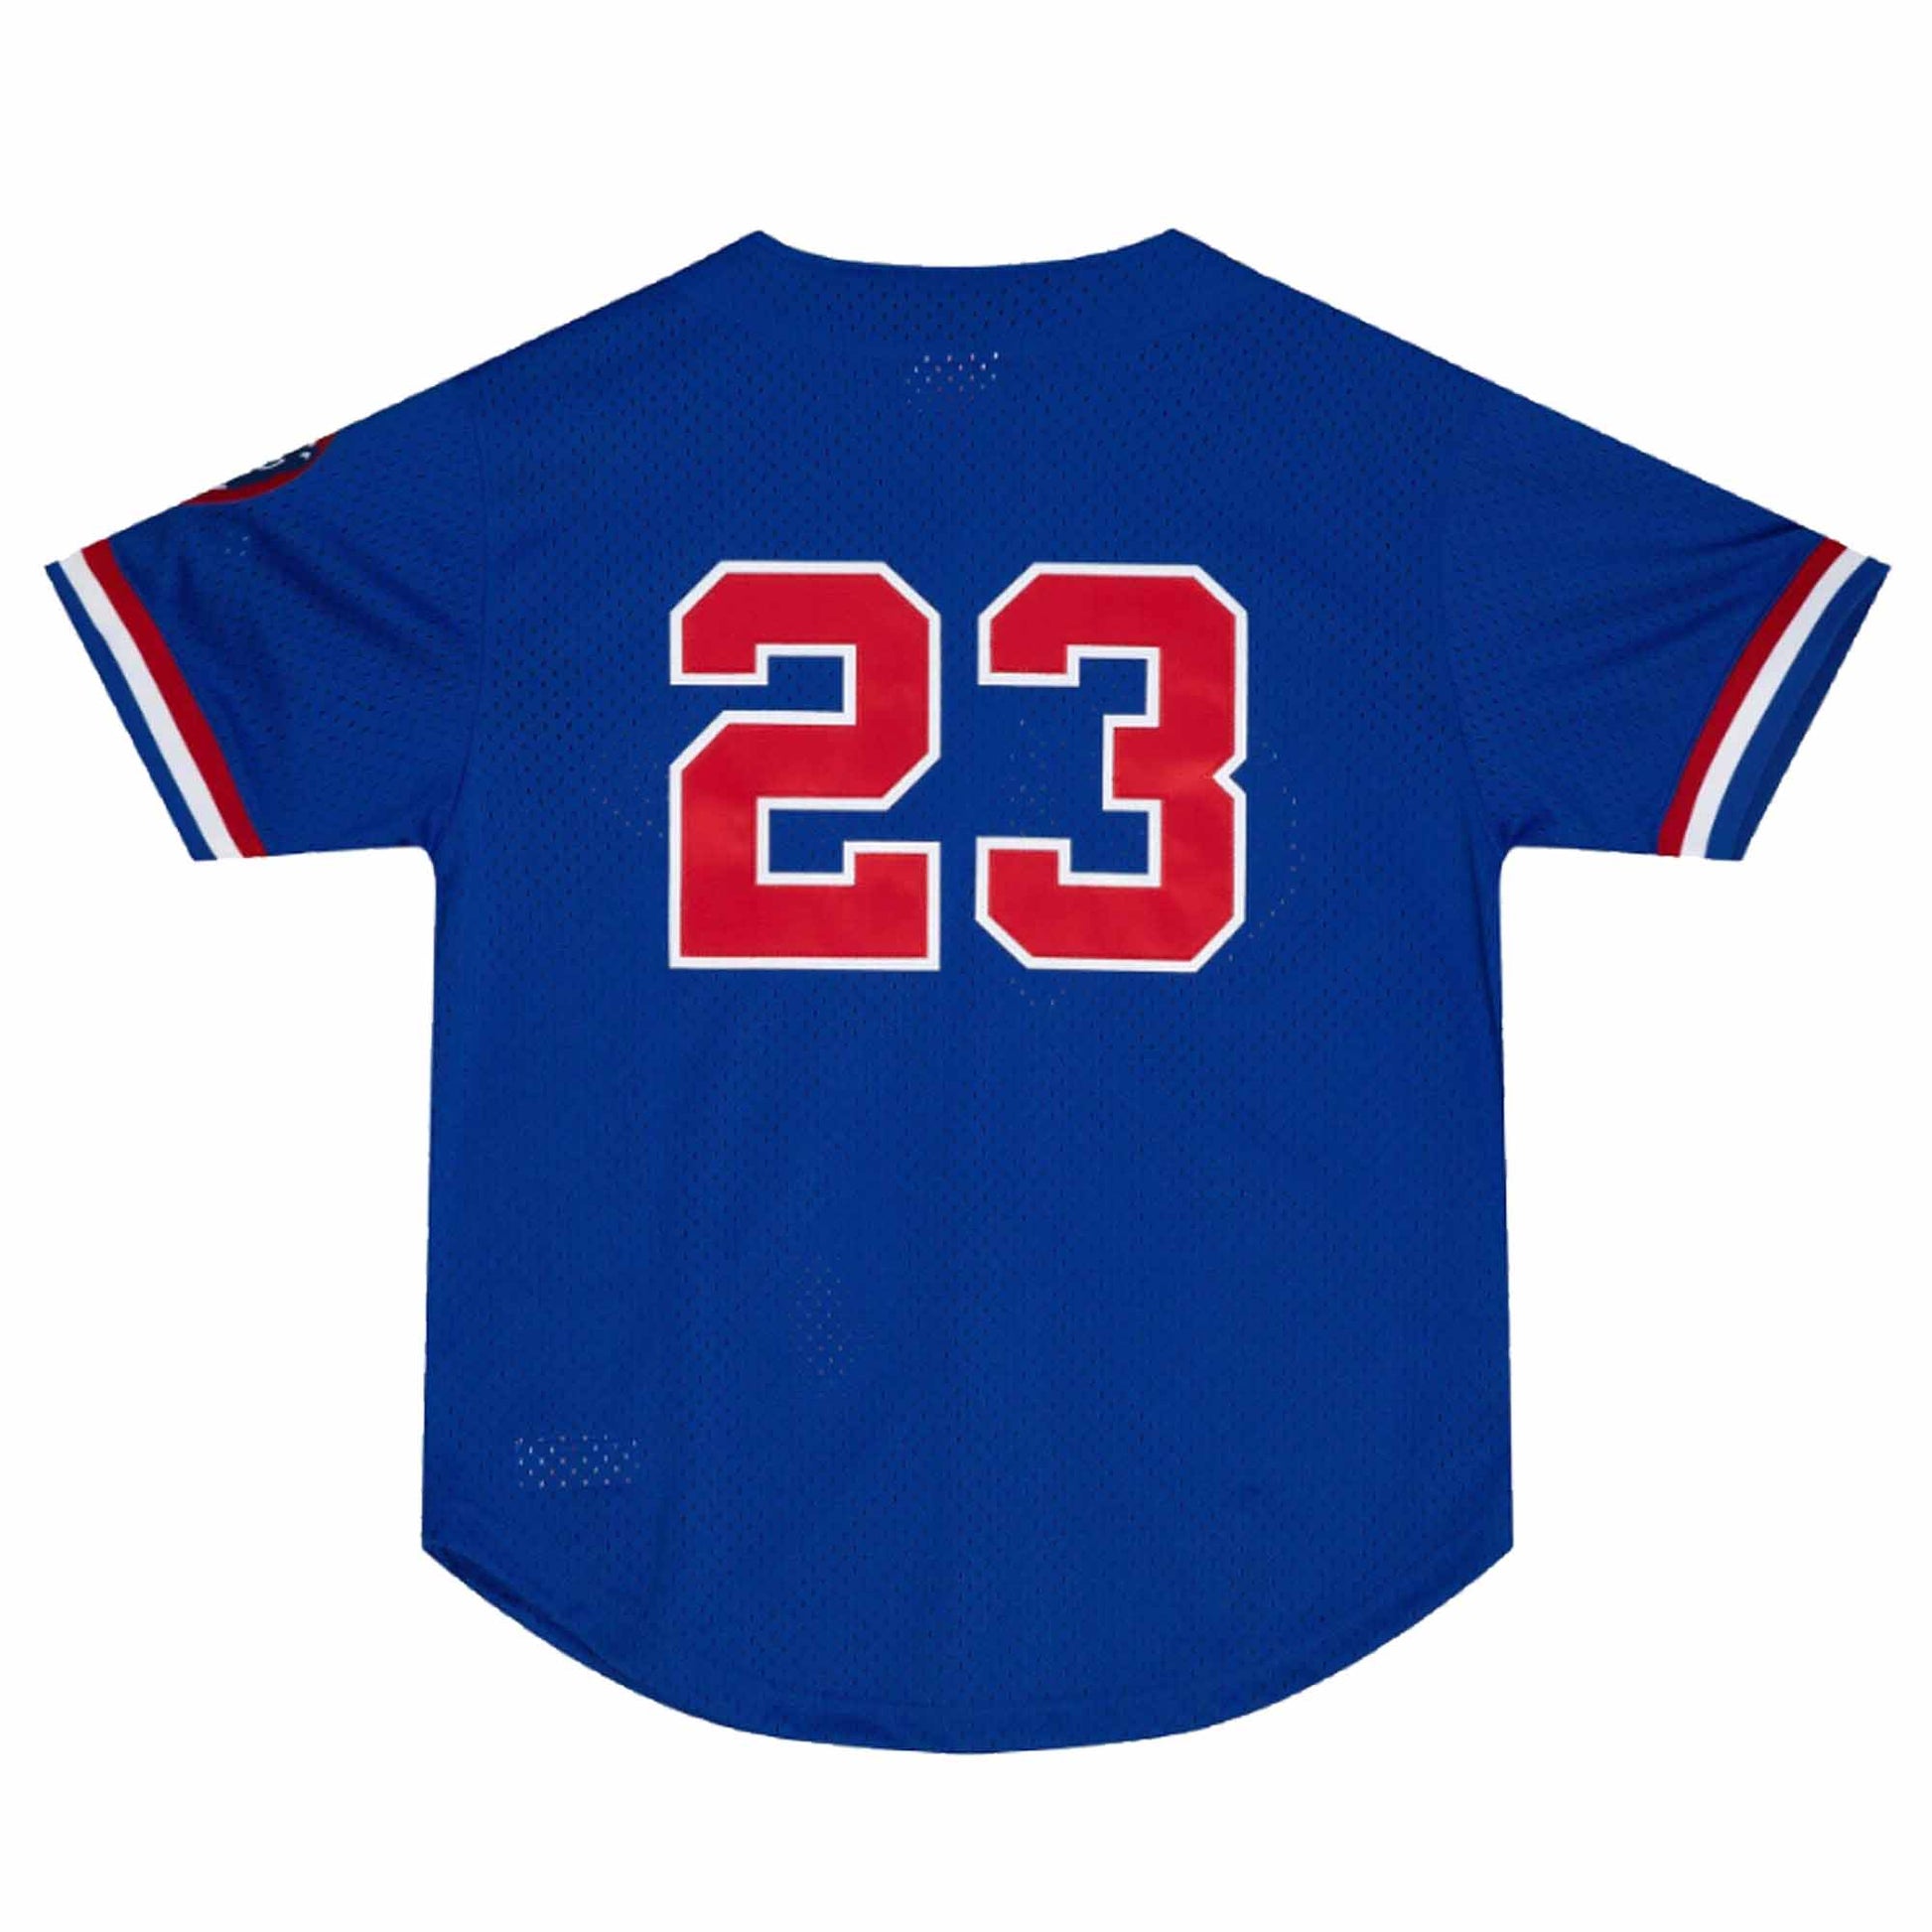 New with tags, BLACK 2XL Majestic Chicago Cubs jersey - clothing